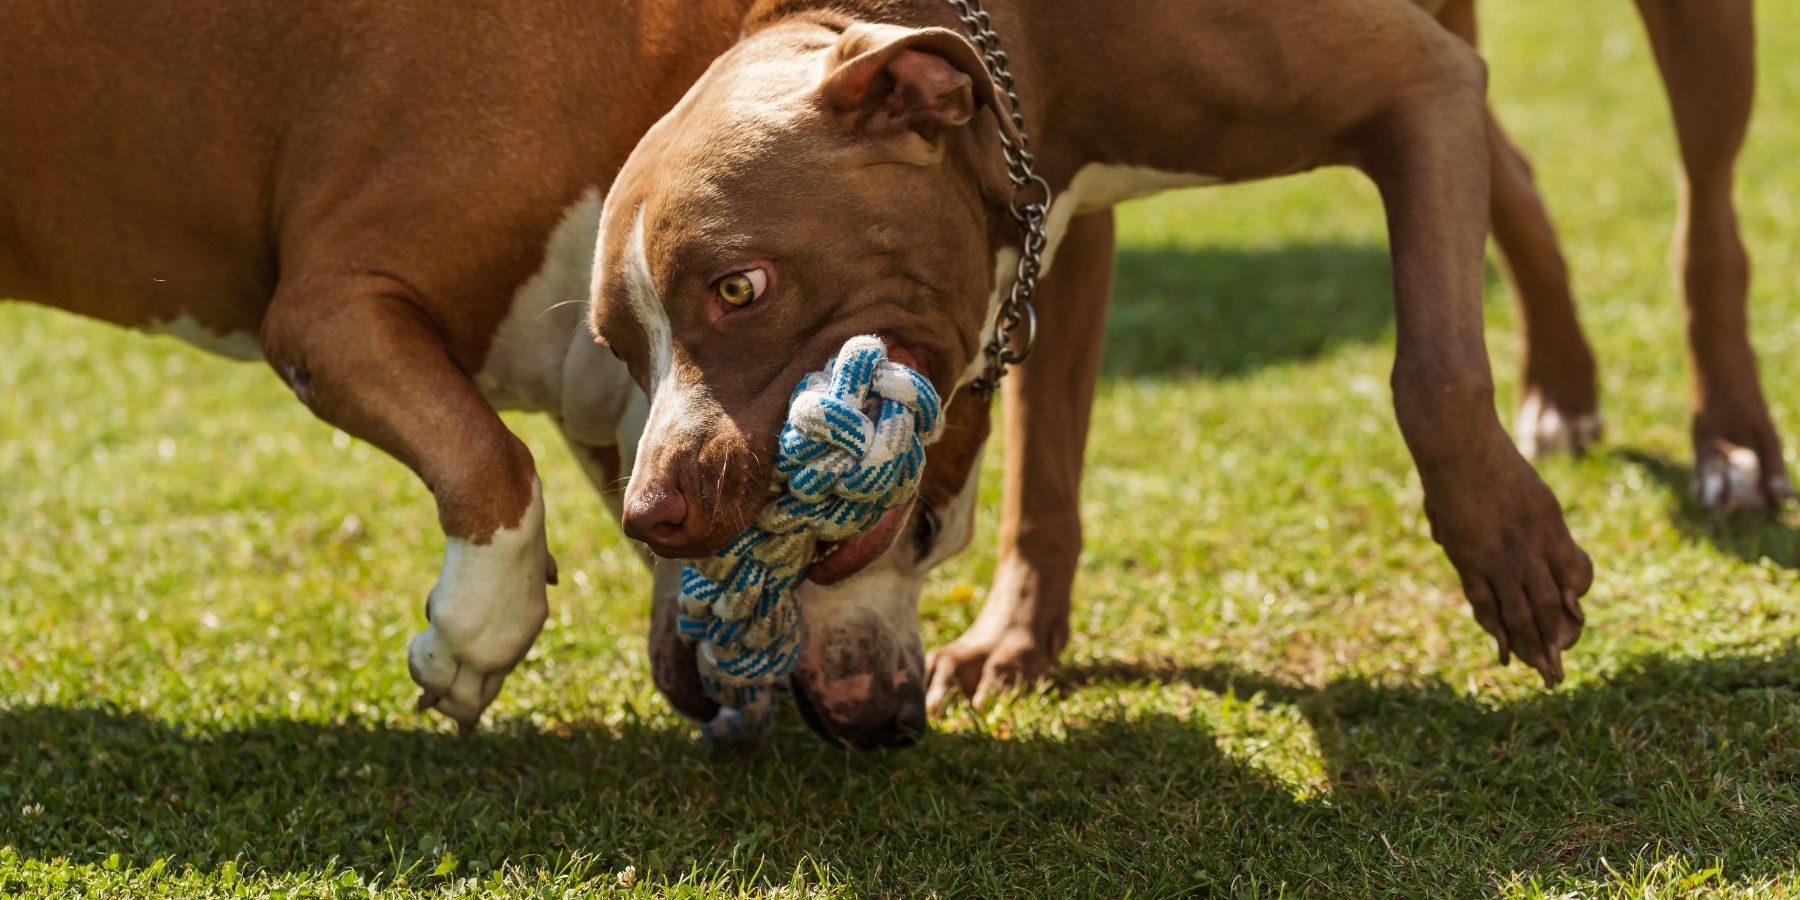 5 Best Tug Toys To Play Tug-Of-War With Your Dog